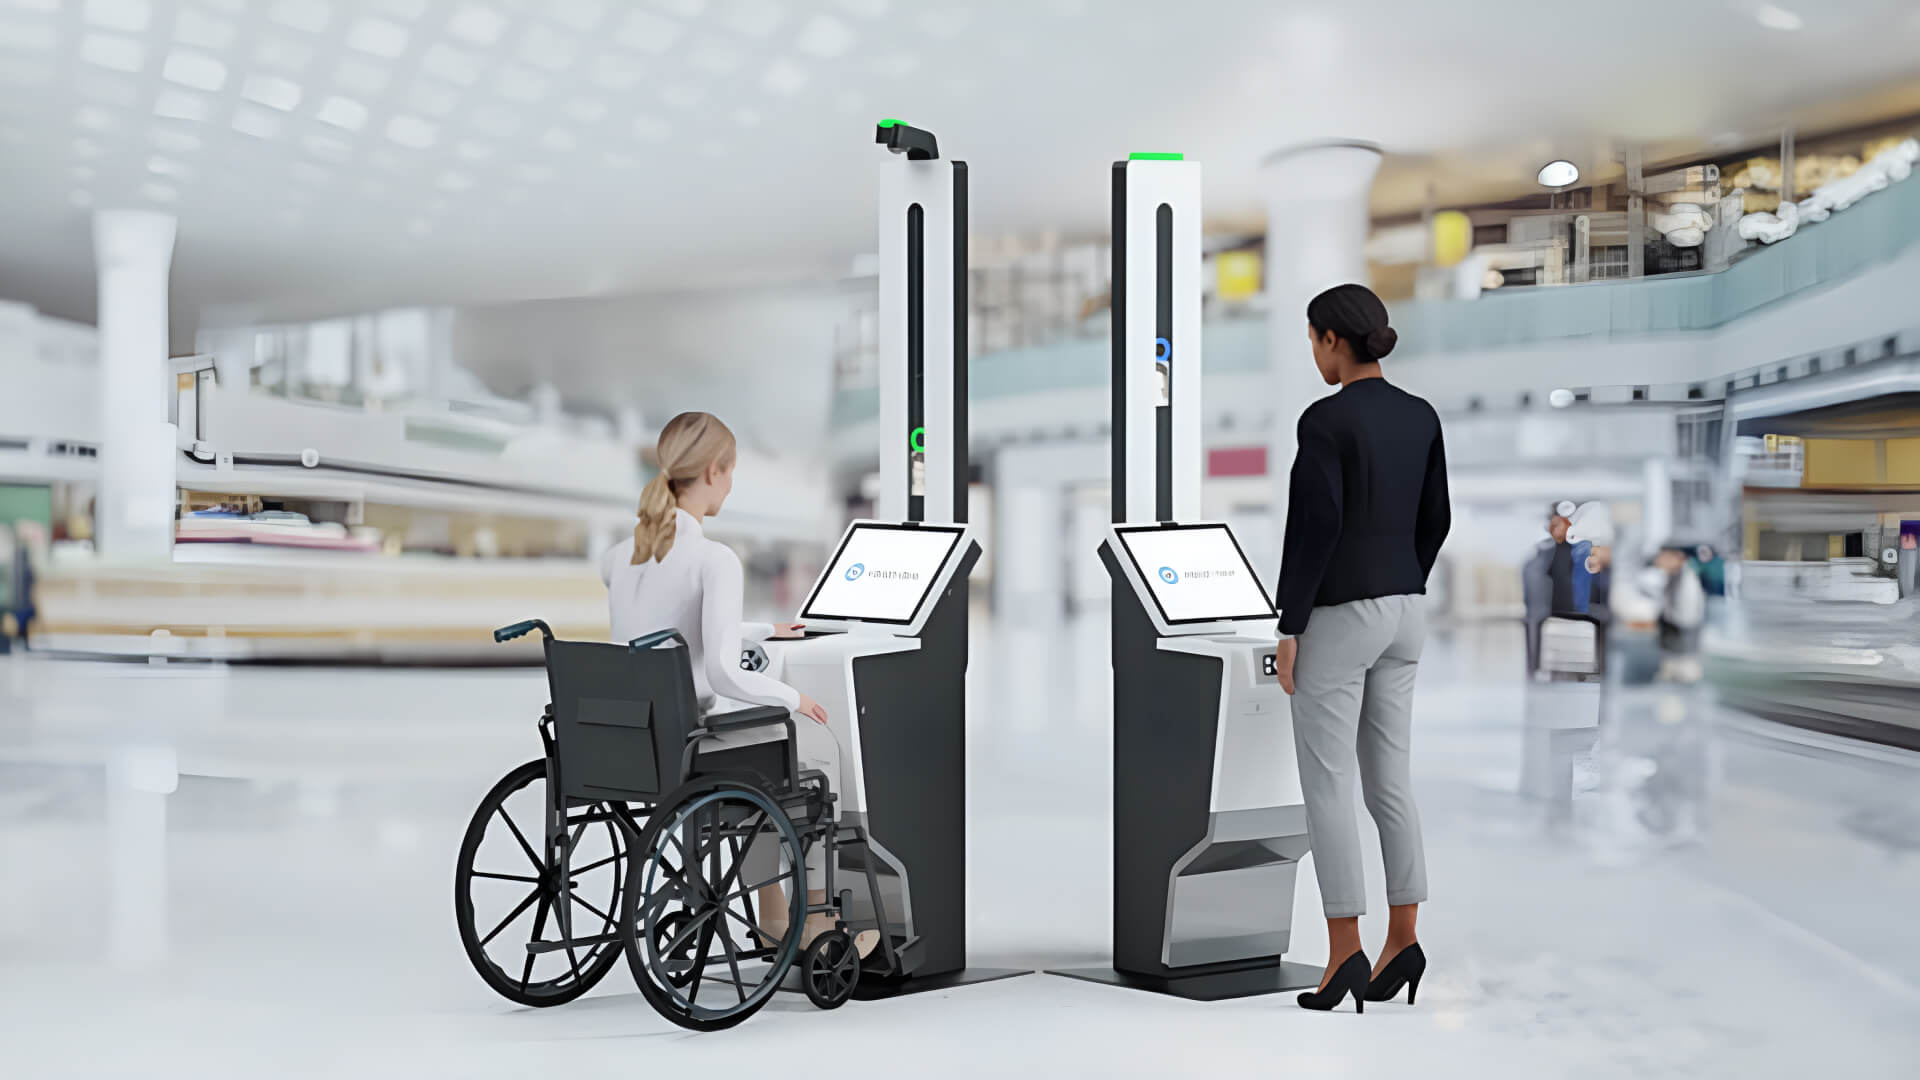 People interacting with all-accessible dynamic digital signage booths.